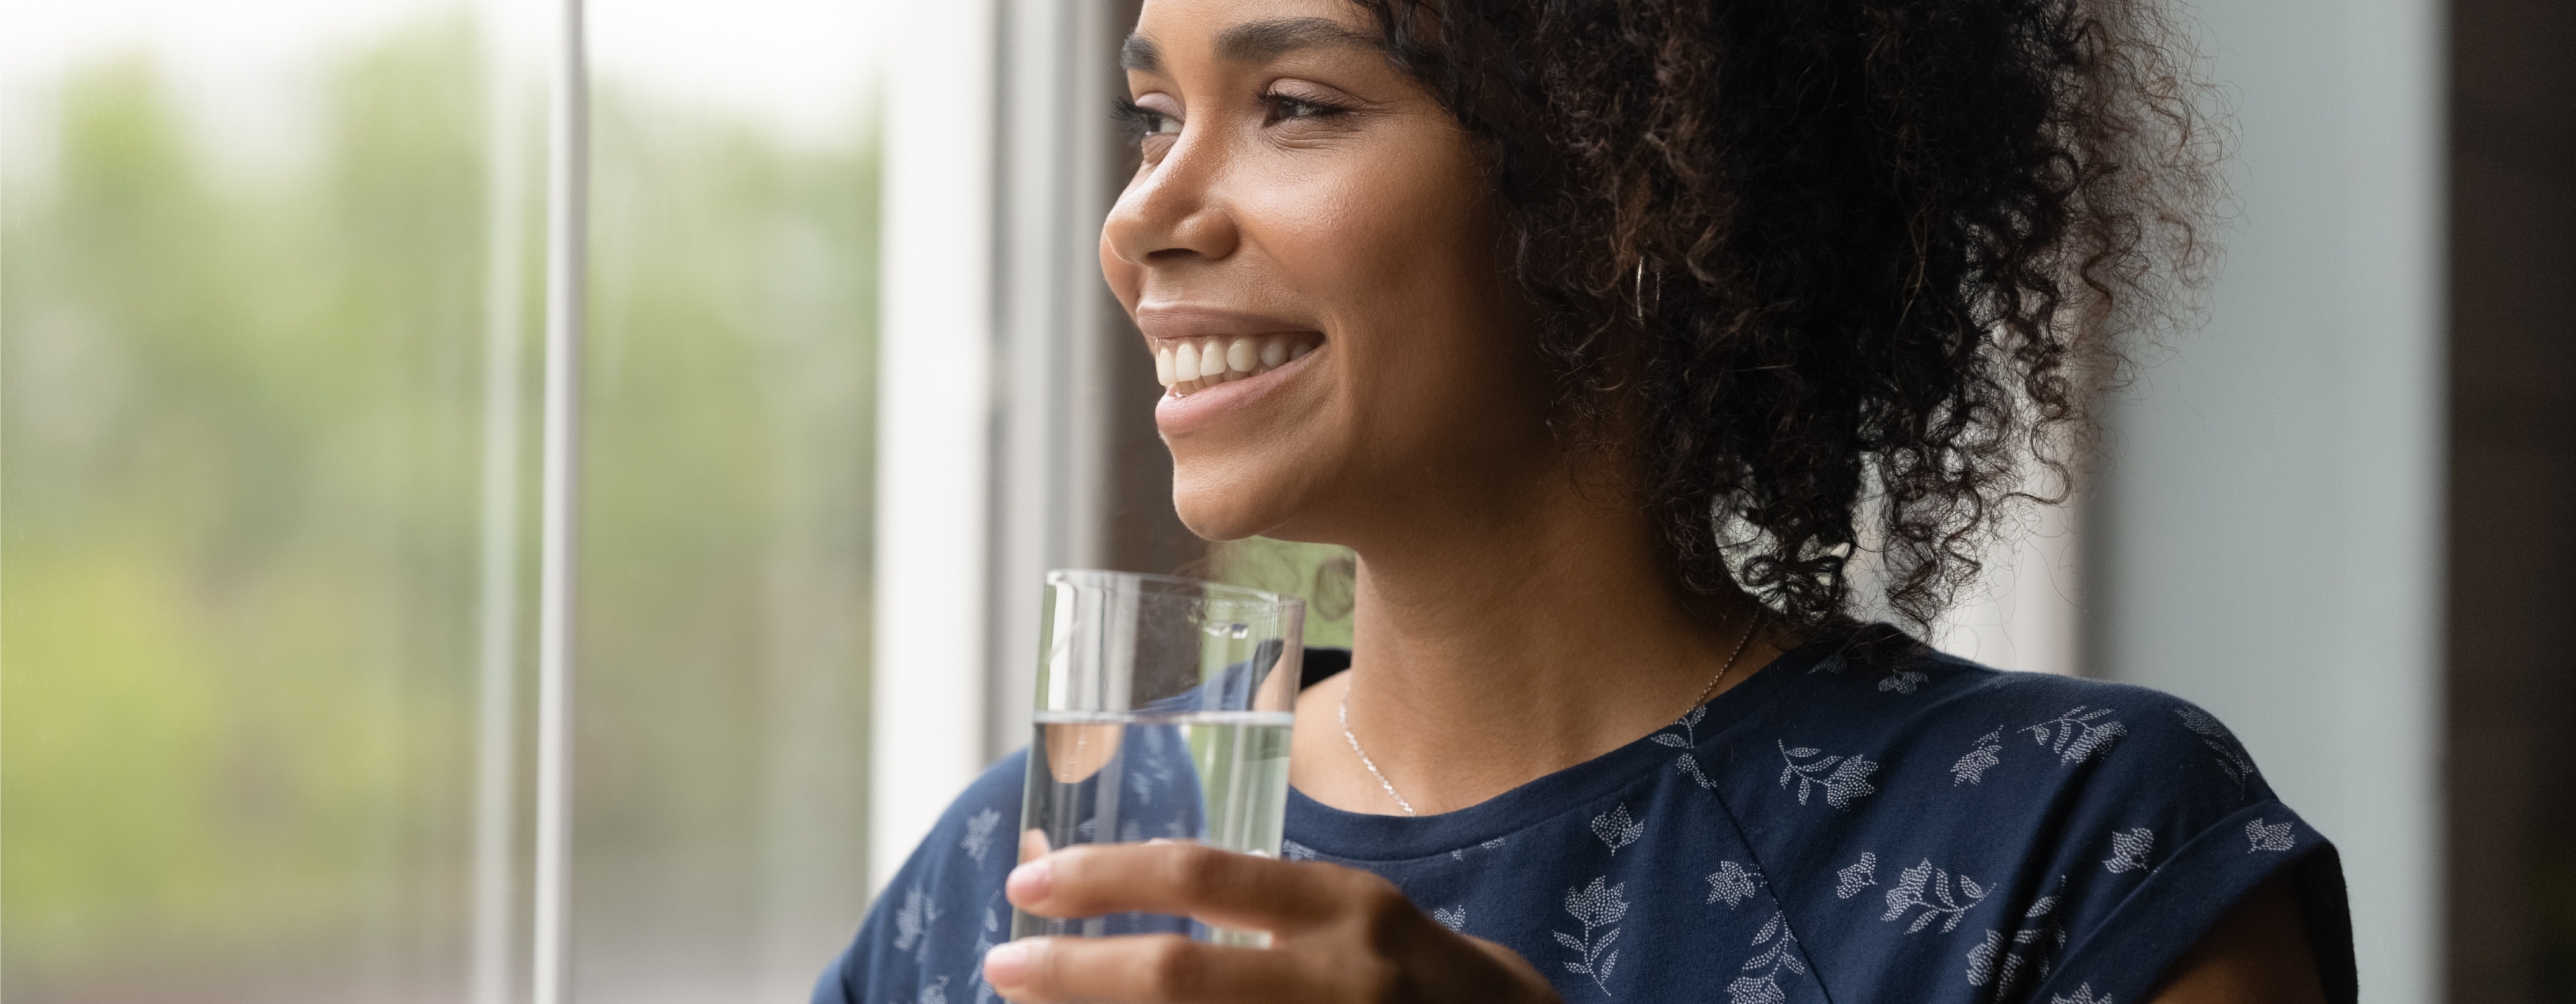 Refreshed Woman Drinking Water to Stay Hydrated